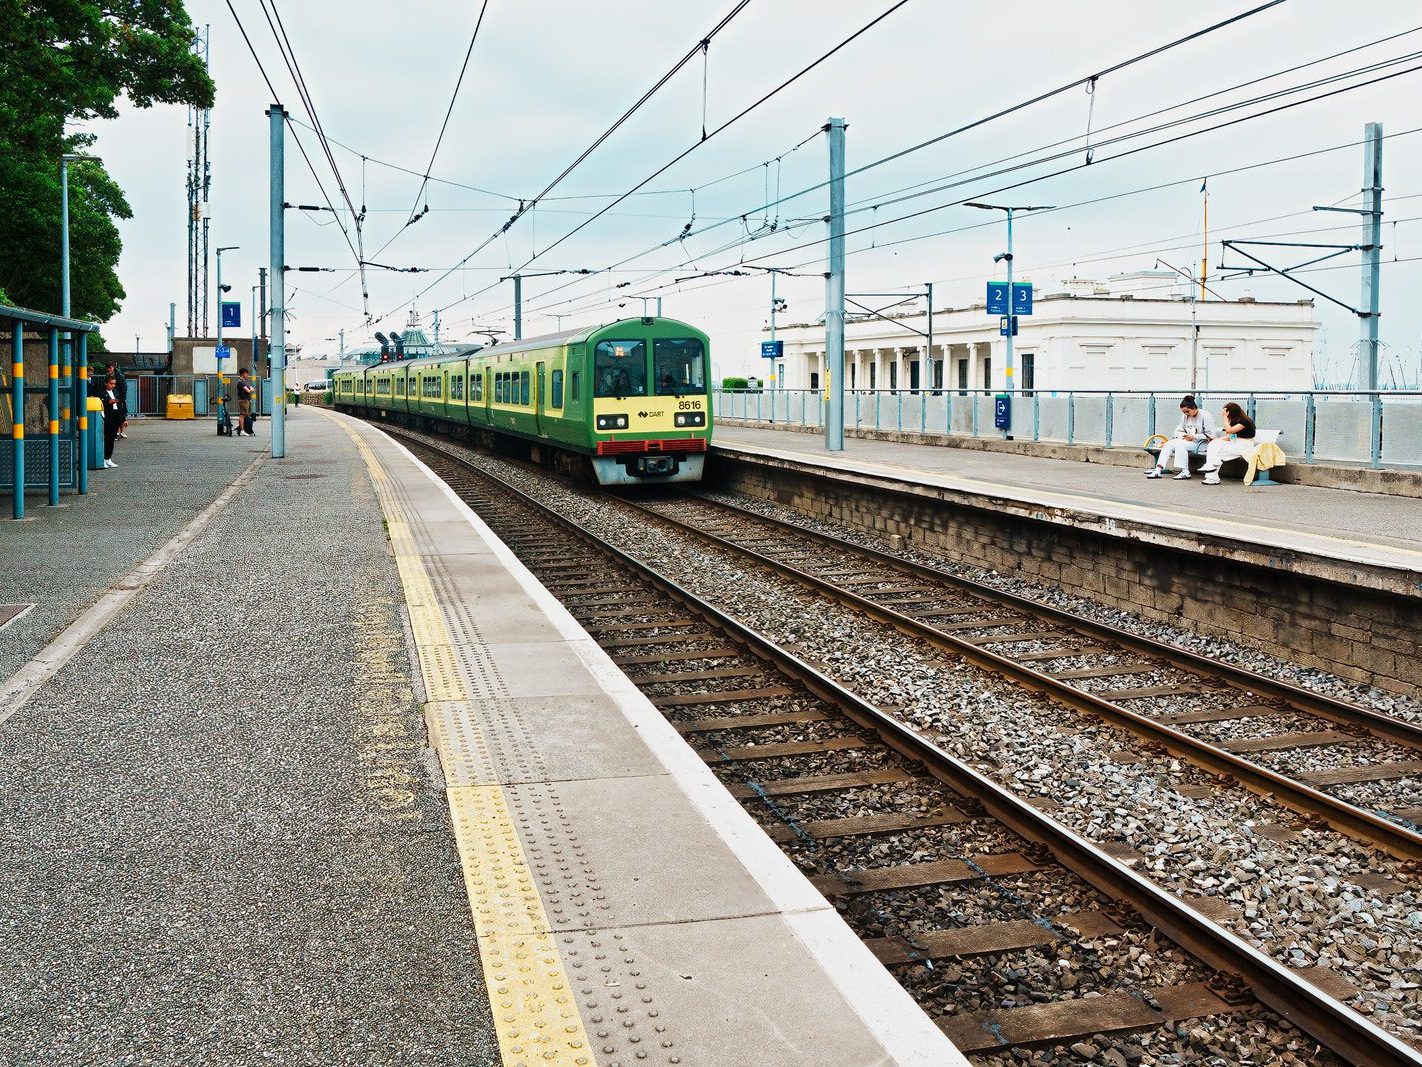 DID YOU KNOW THAT IT IS MALLIN STATION [THE TRAIN STATION IN DUN LAOGHAIRE] 003